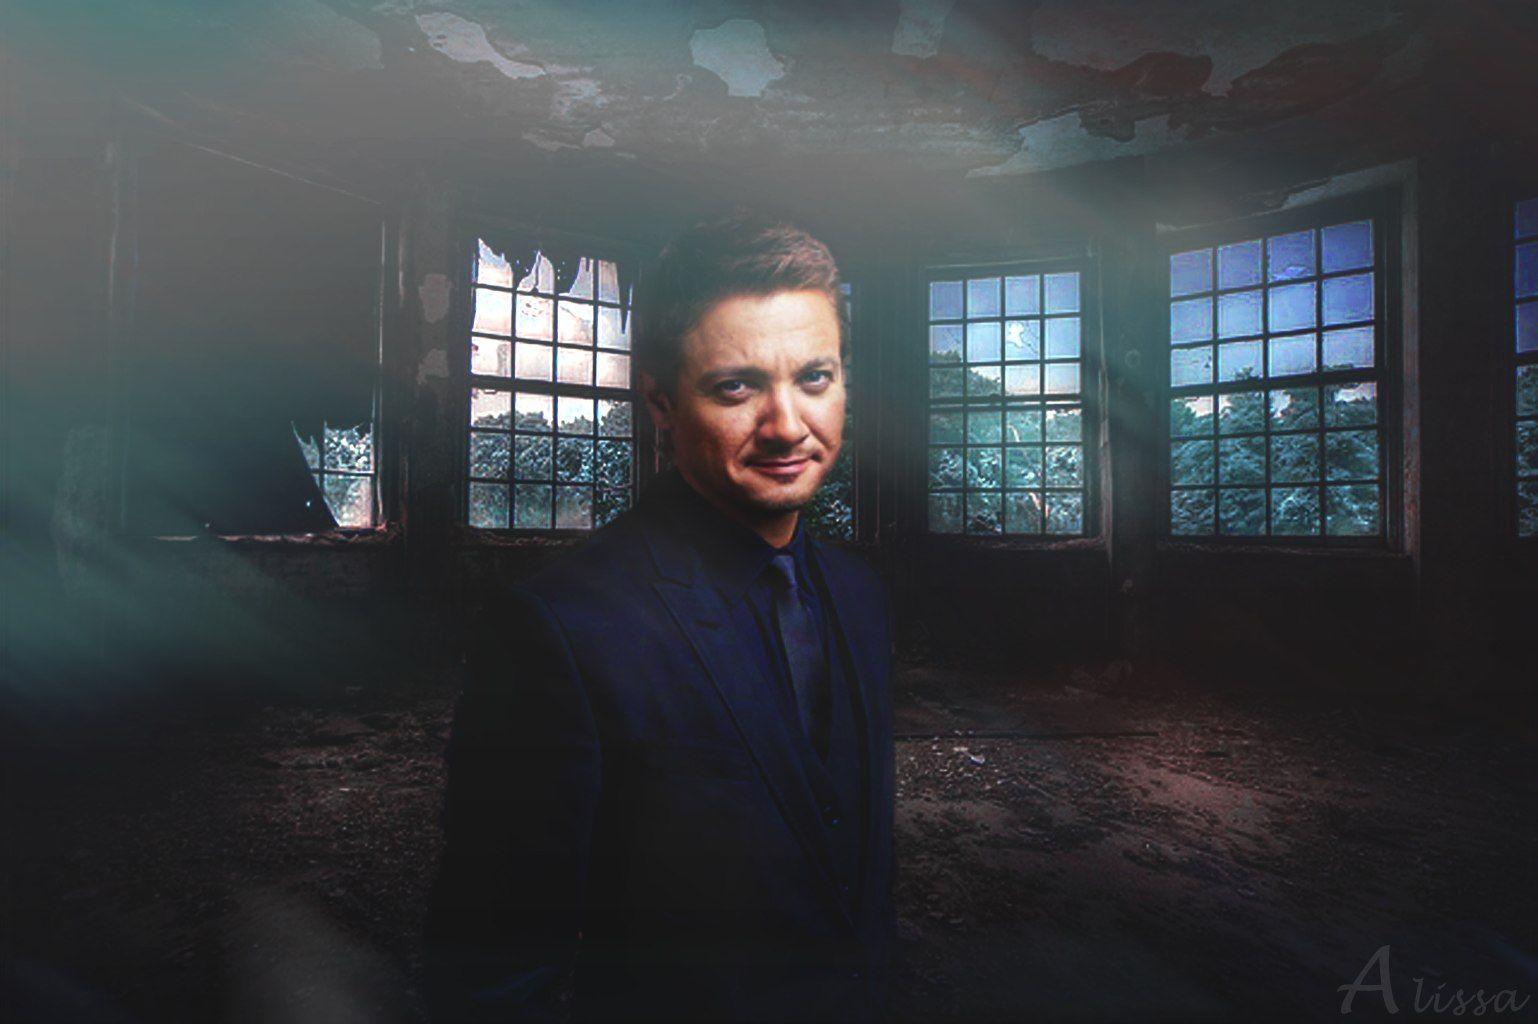 View topic Wallpaper of jeremy Renner&;s